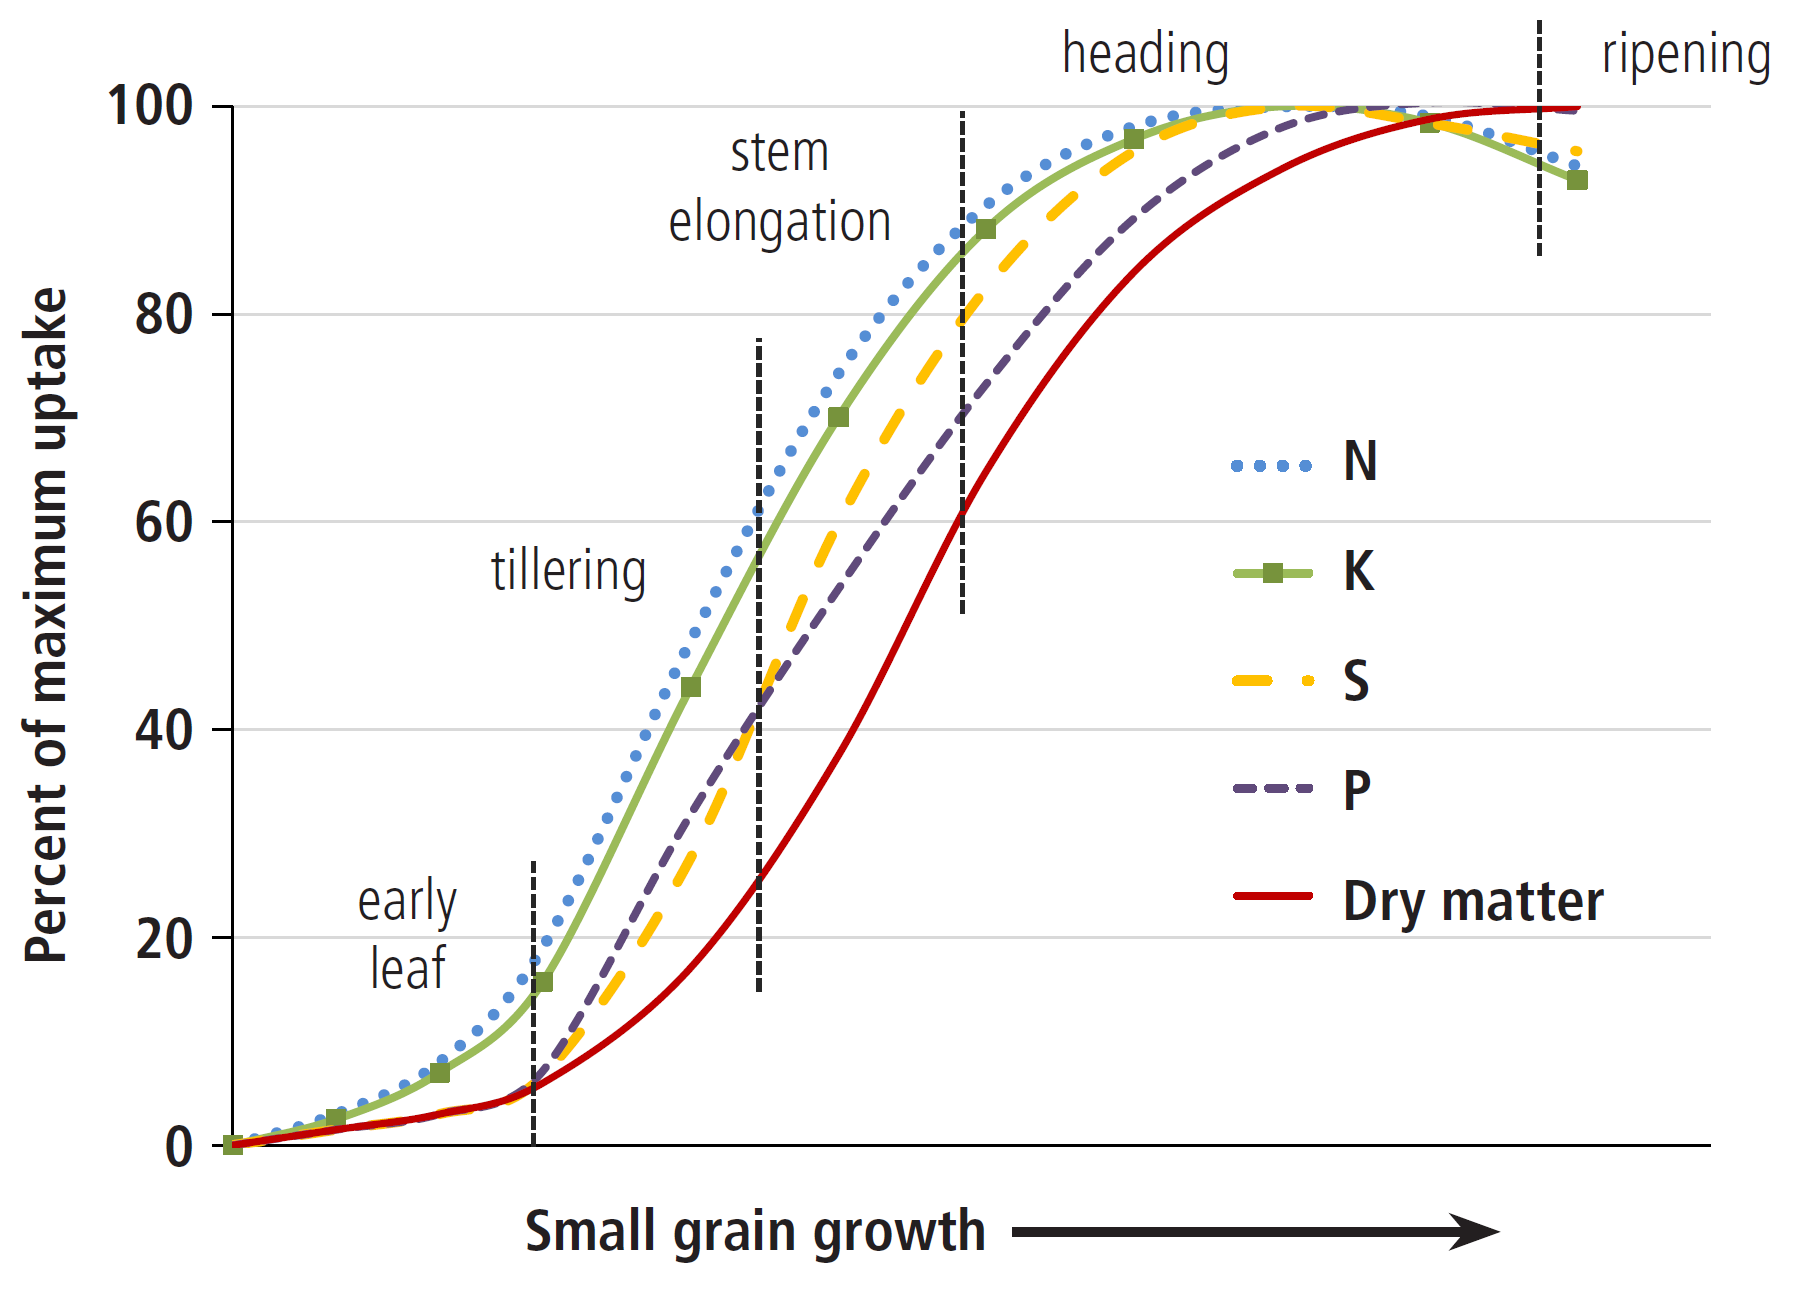 Graph displaying a bell-curve type relationship between small grain growth and percent of maximum upatake